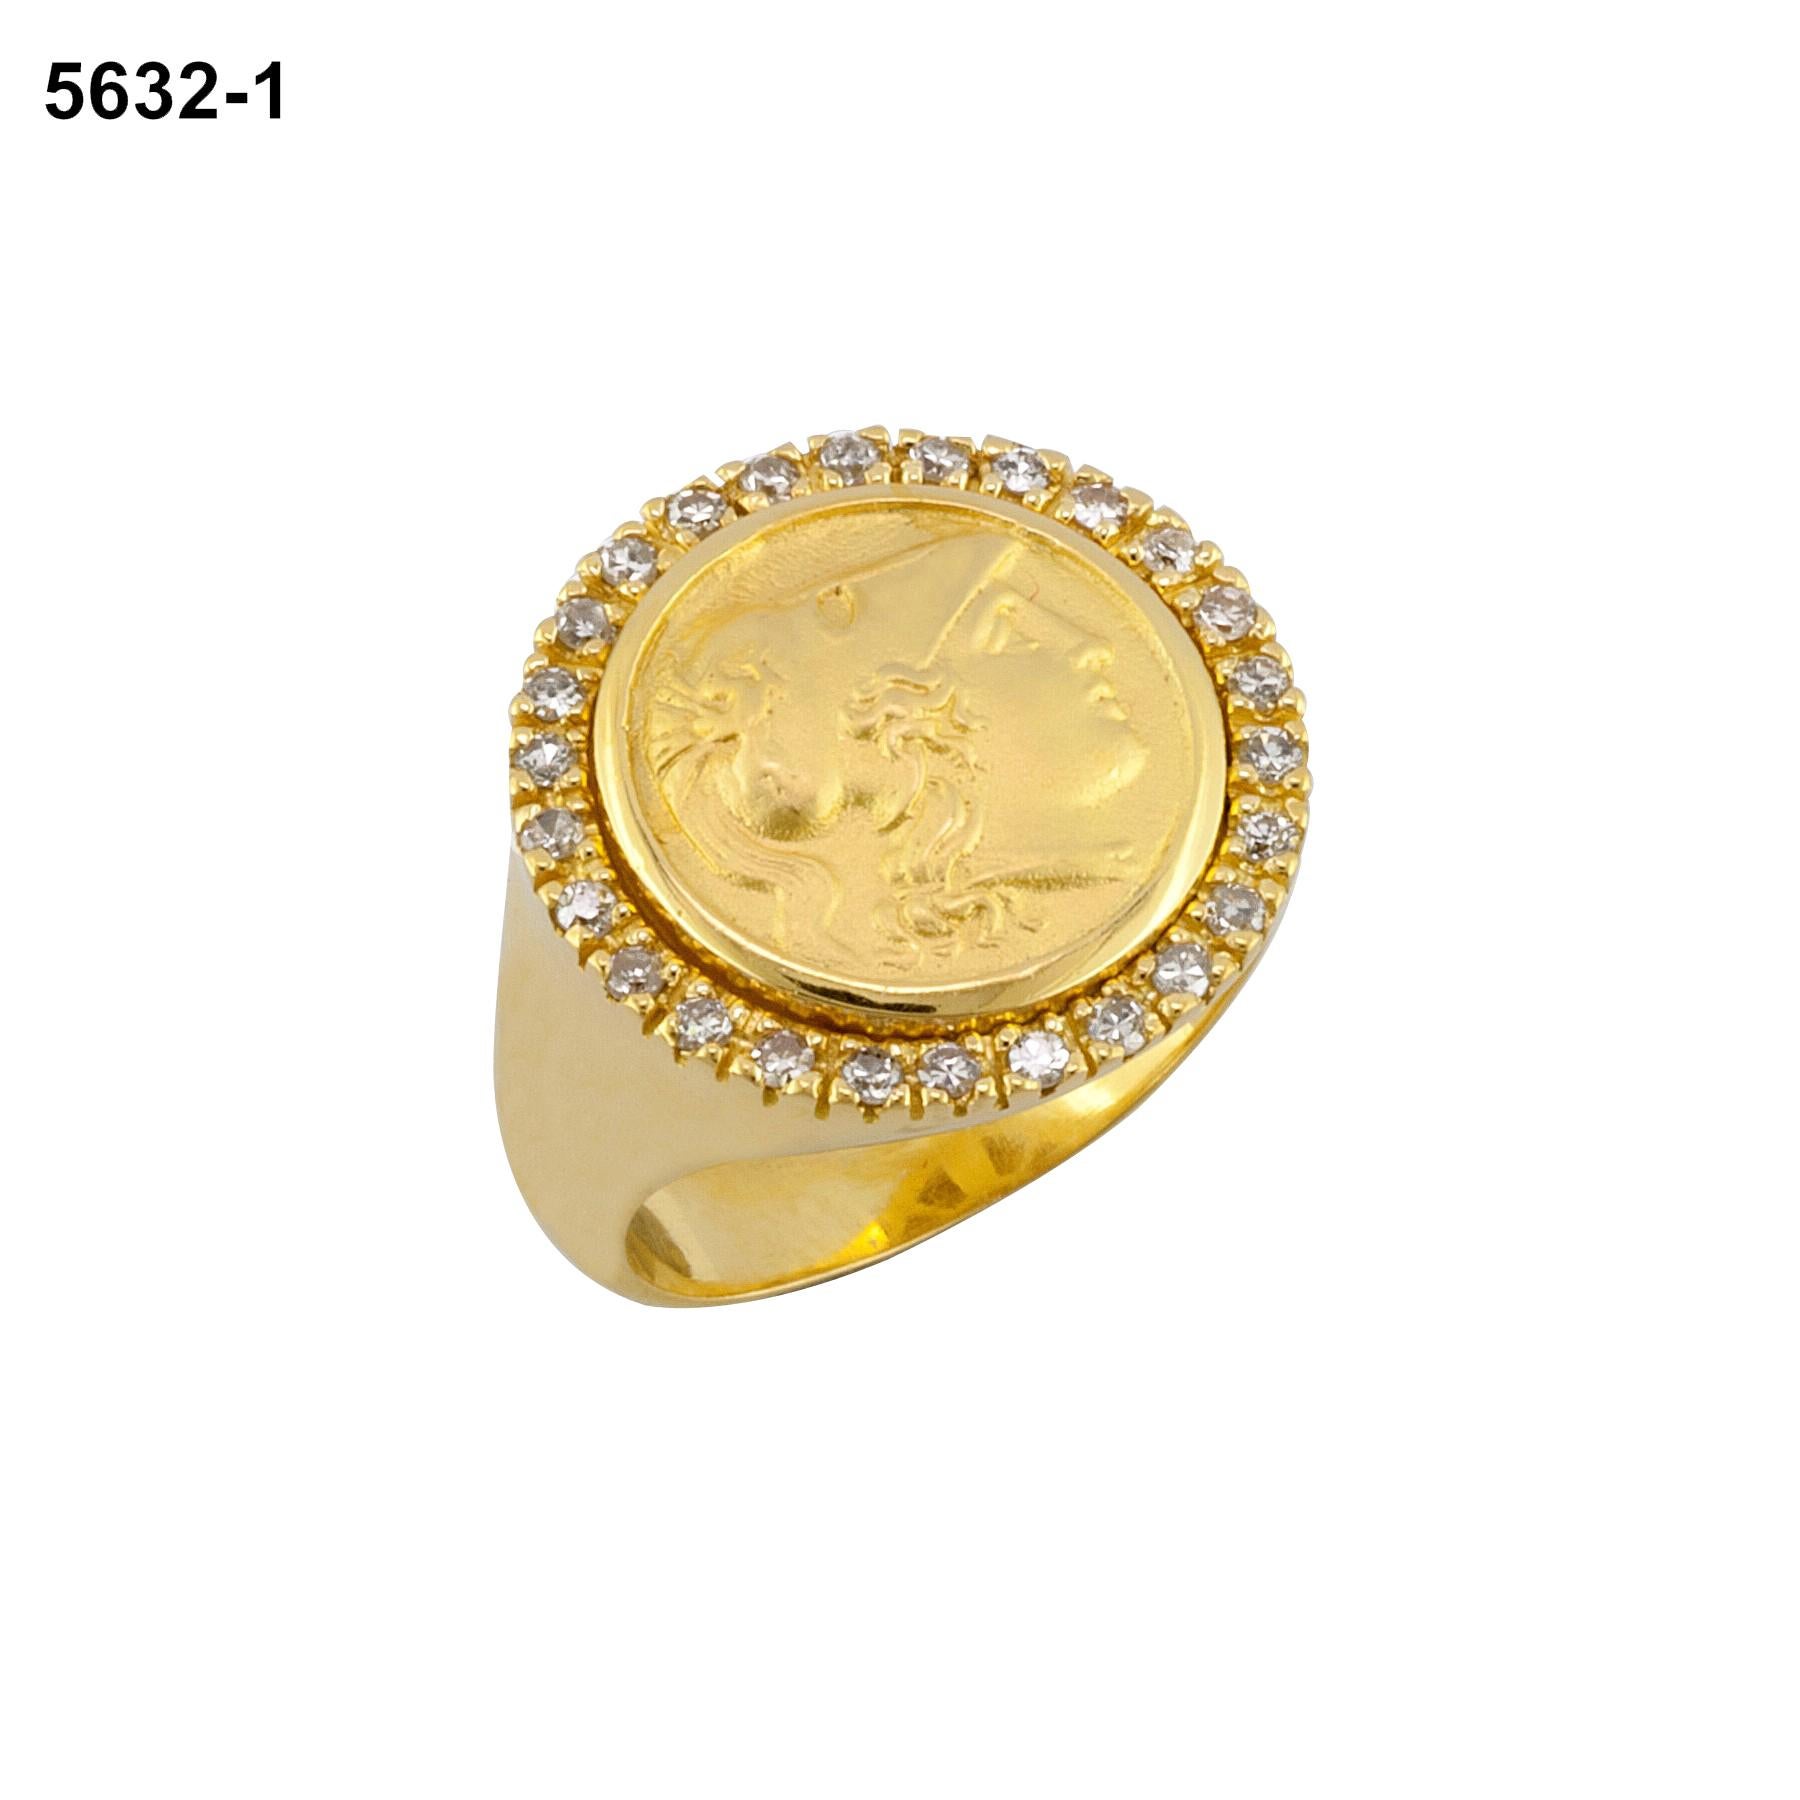 This S.Georgios solid 18 Karat Yellow Gold Man and Woman Coin Ring is all made by hand. The ring has a solid 18 Karat Gold Coin of Athina, (the coin is an exact copy of the original) the Goddess of wisdom - a symbol of knowledge and protector of